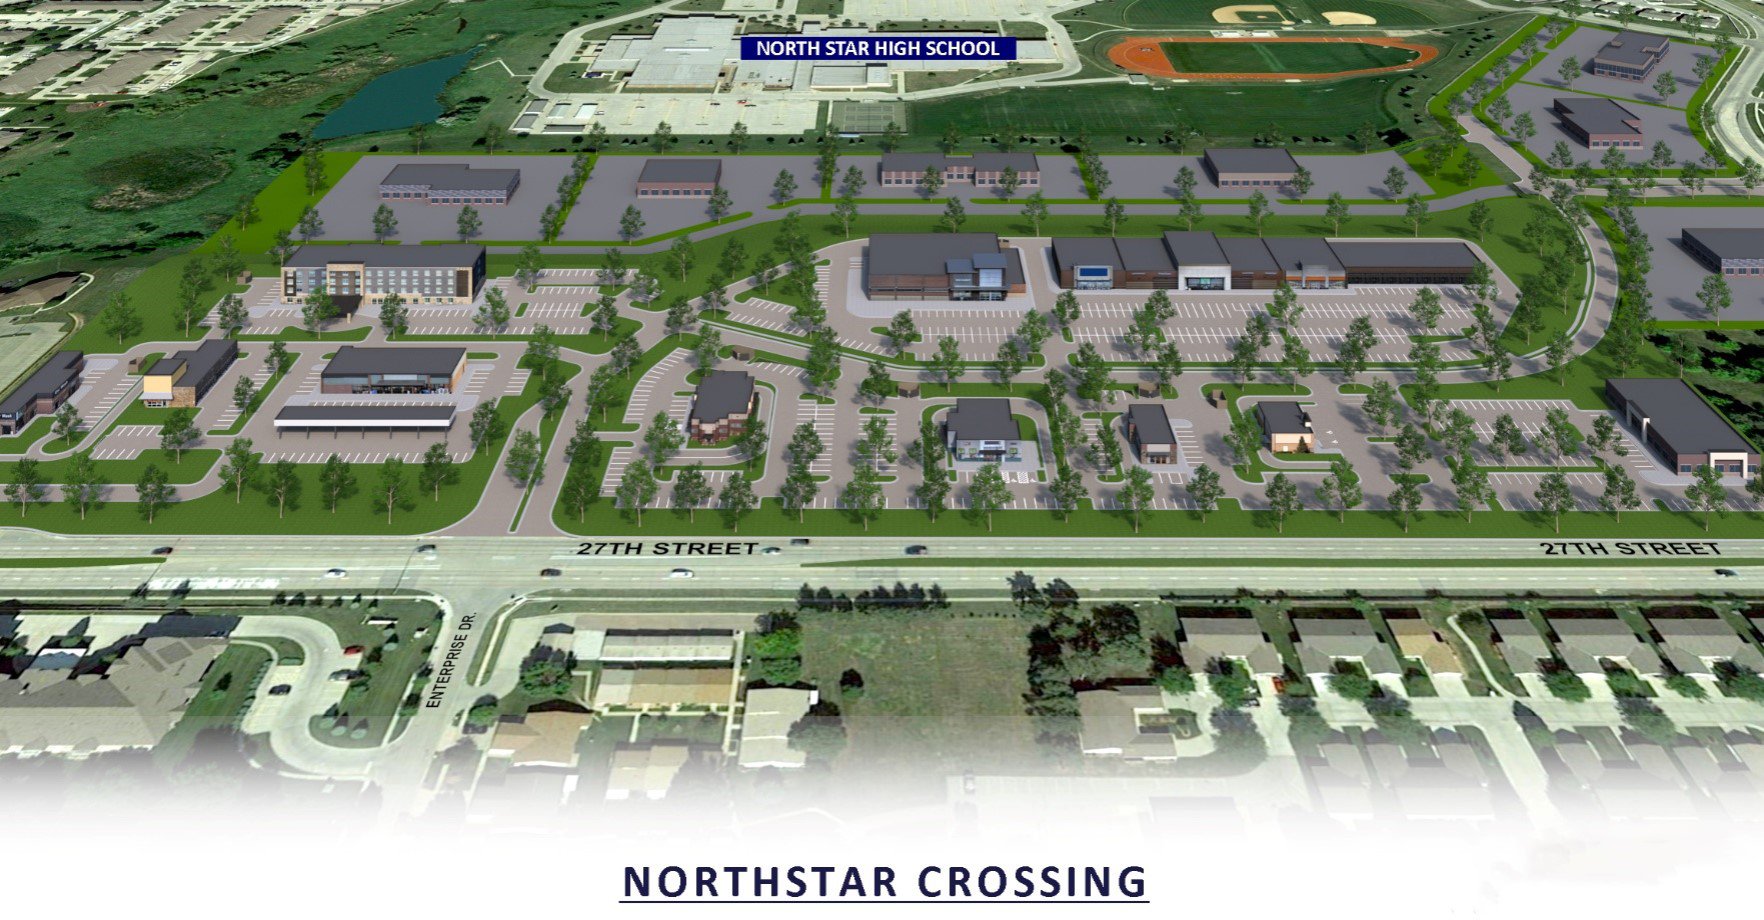 New shopping center coming to north Lincoln in 2022